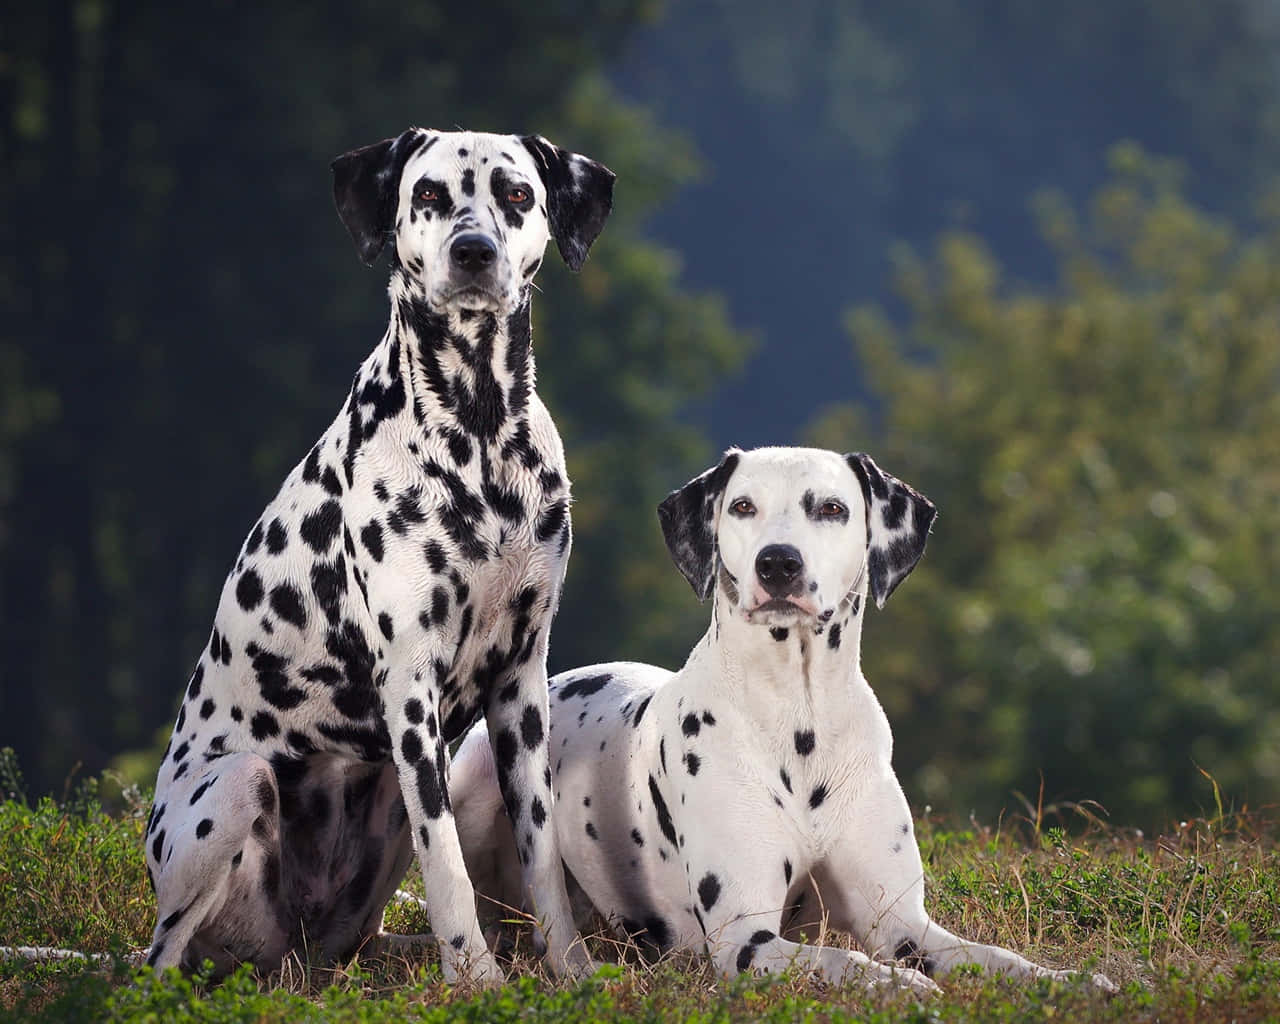 Two Dalmatian Dogs Sitting In The Grass